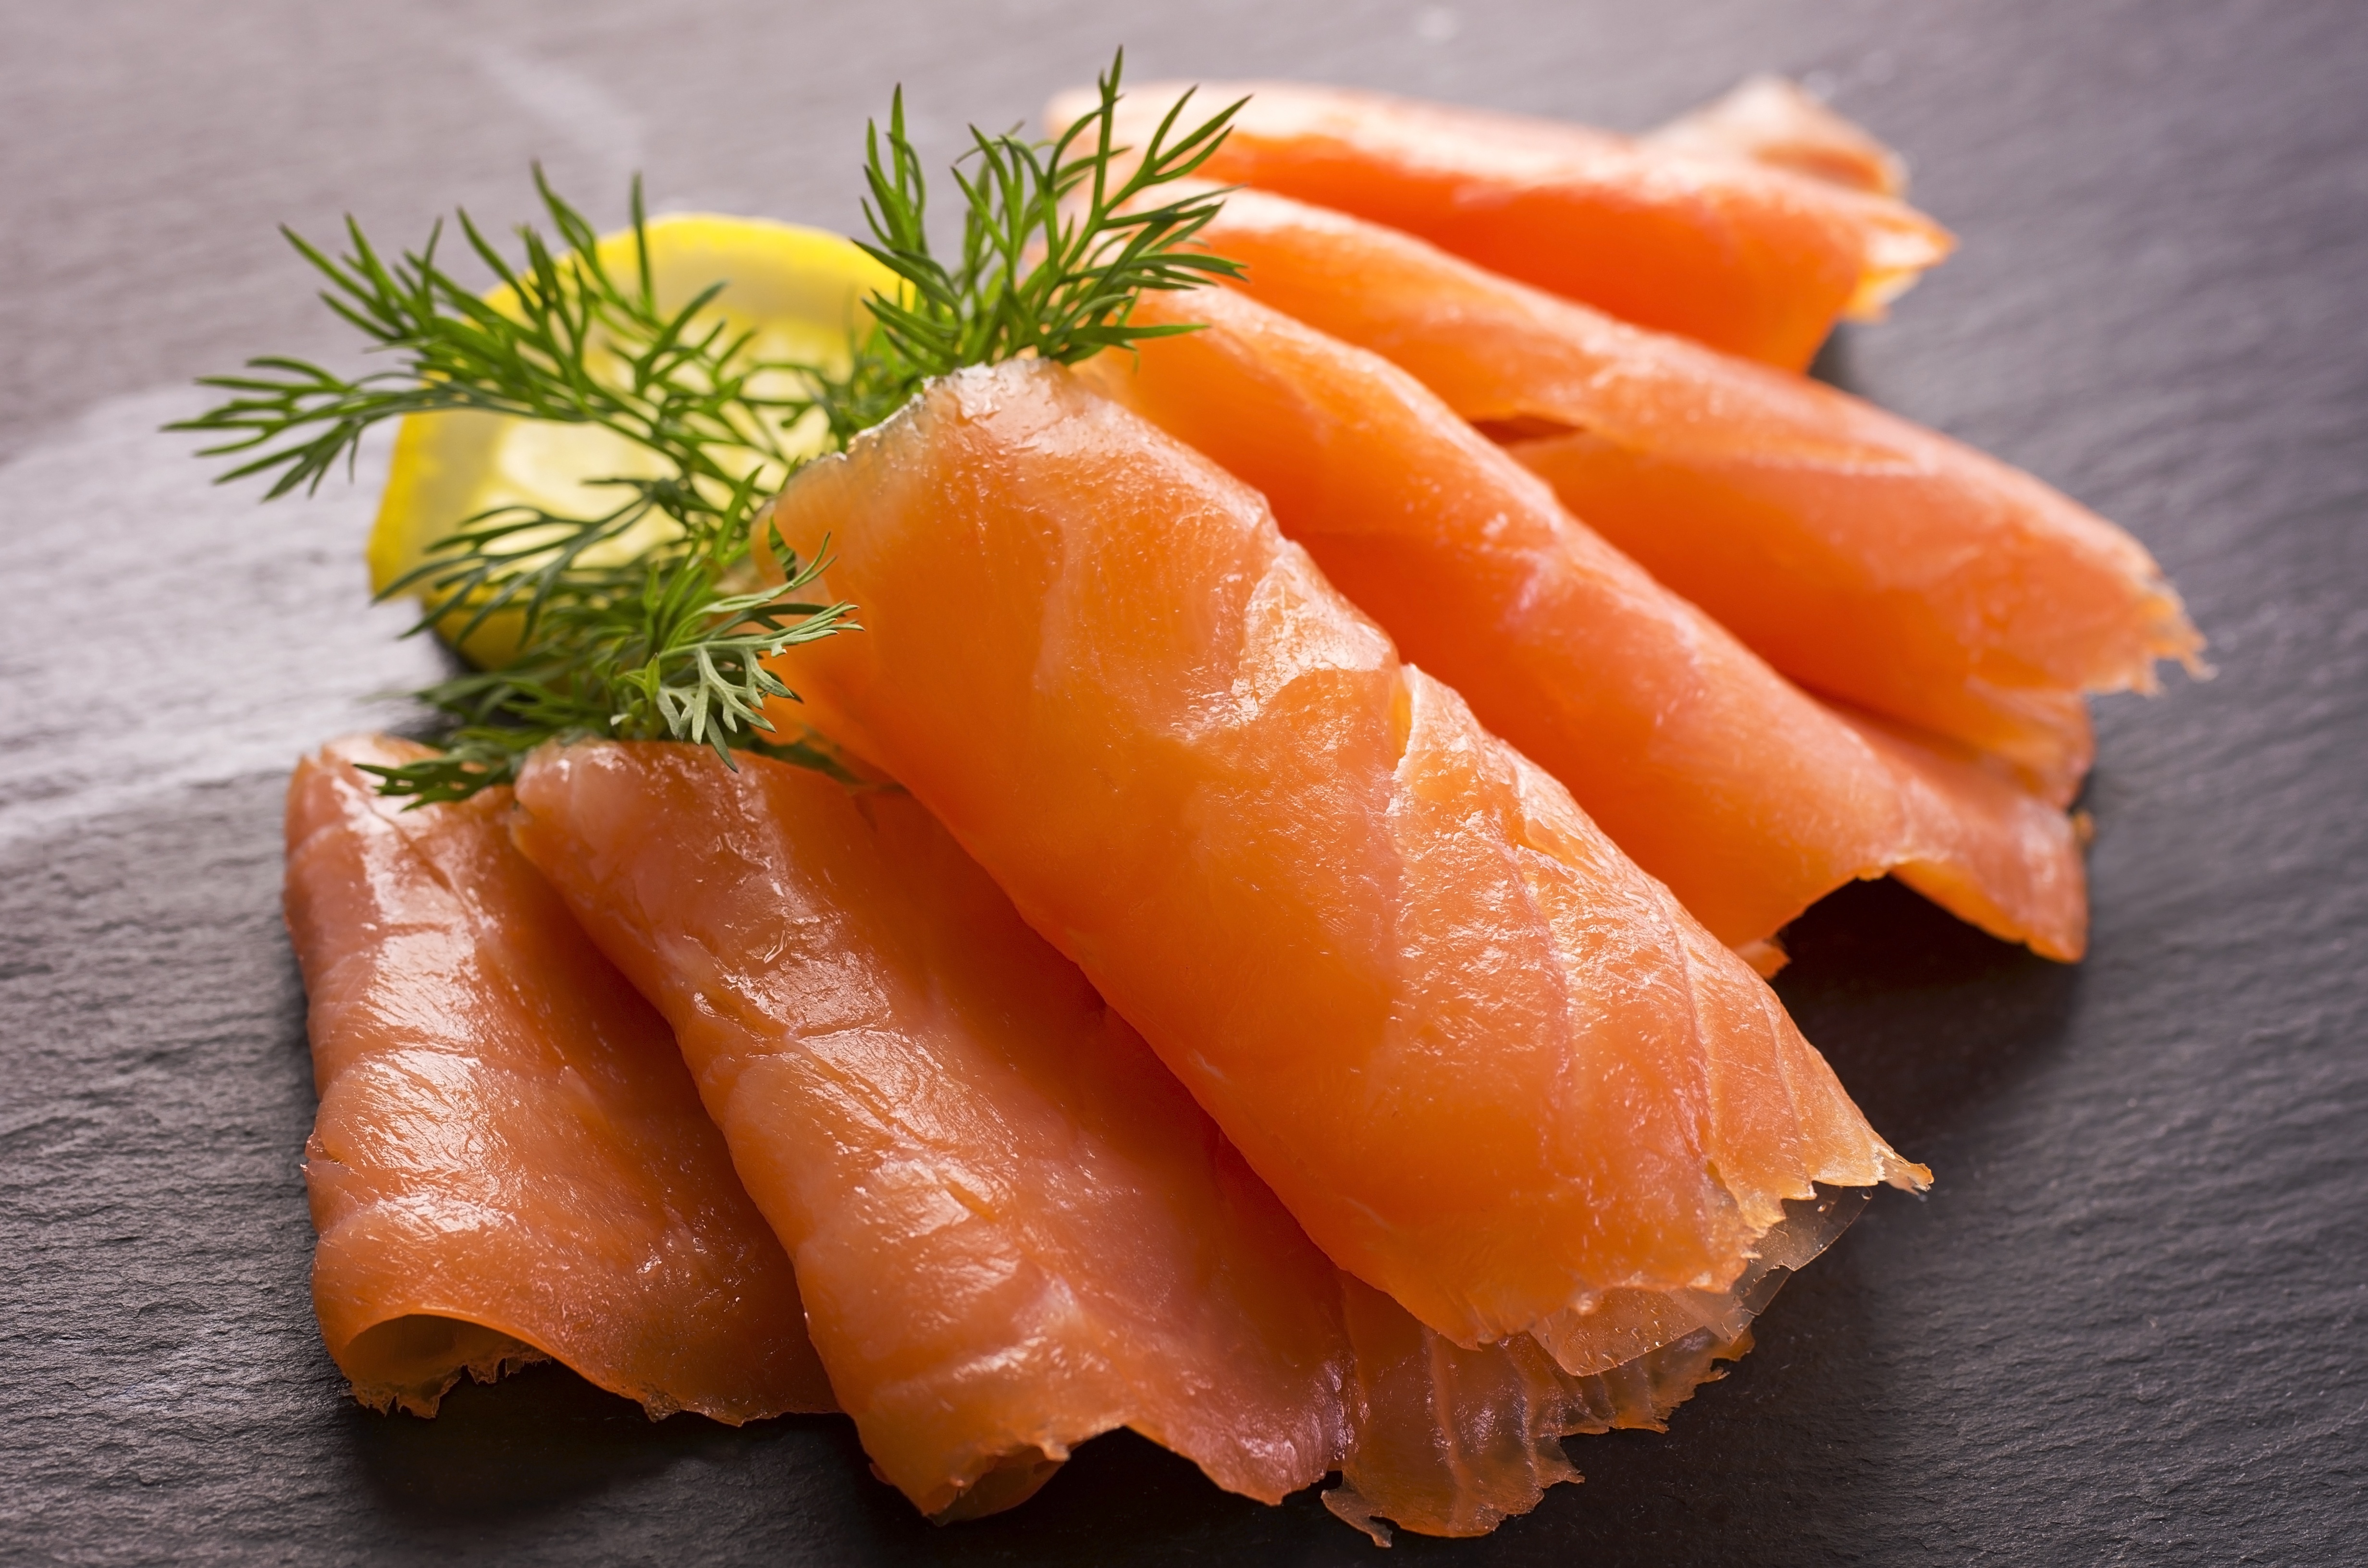 Article image for Listeria deaths: Smoked salmon safe for most, but should be avoided by some